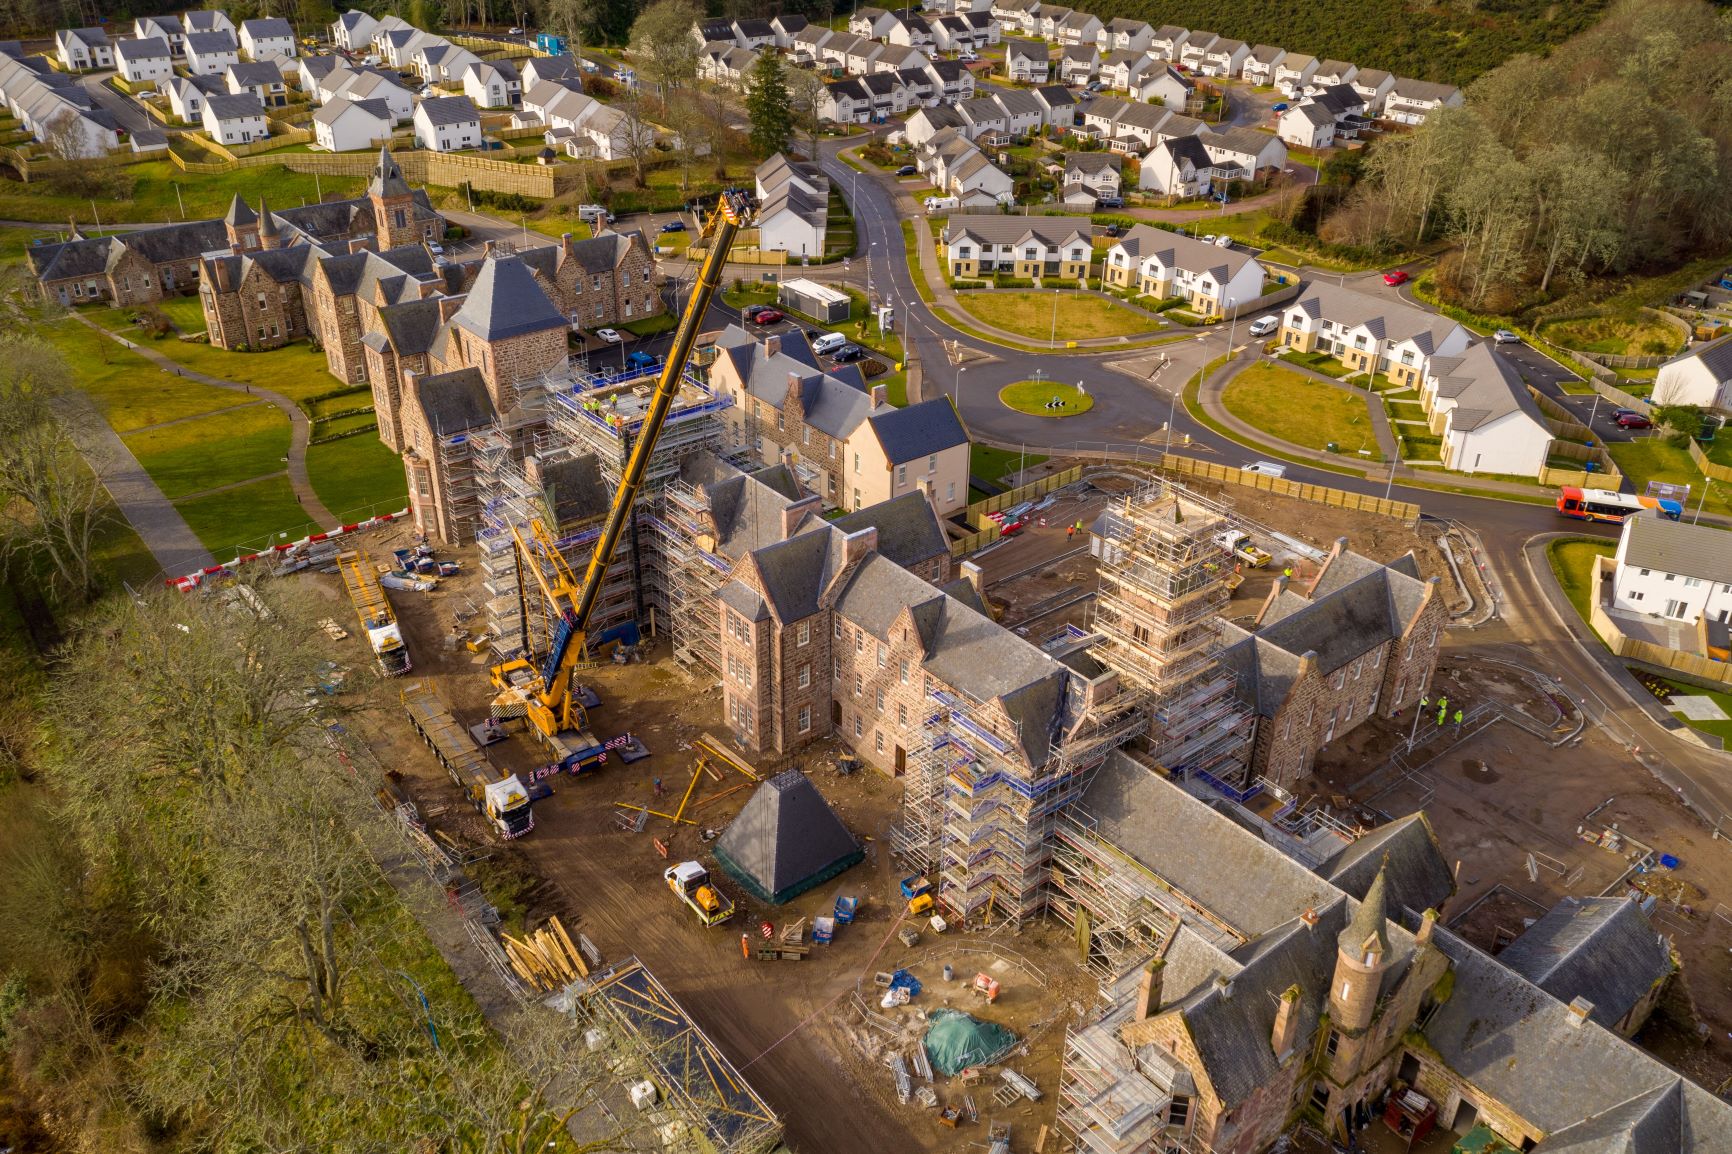 The second and final roof tower was lifted back into place at Great Glen Hall in Inverness.